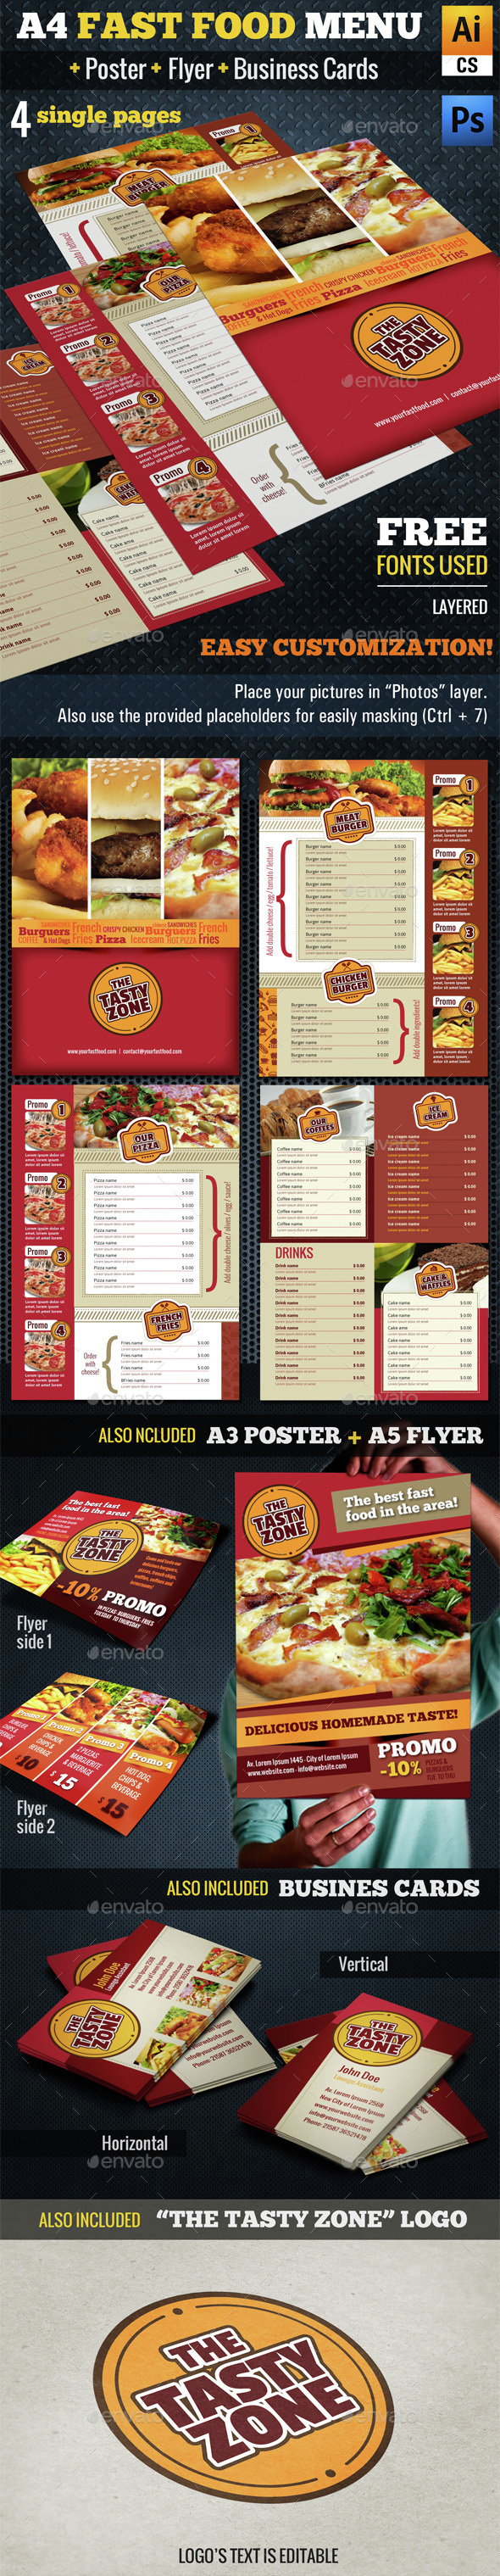 A4 Fast Food Menu + Poster + Flyer + Cards